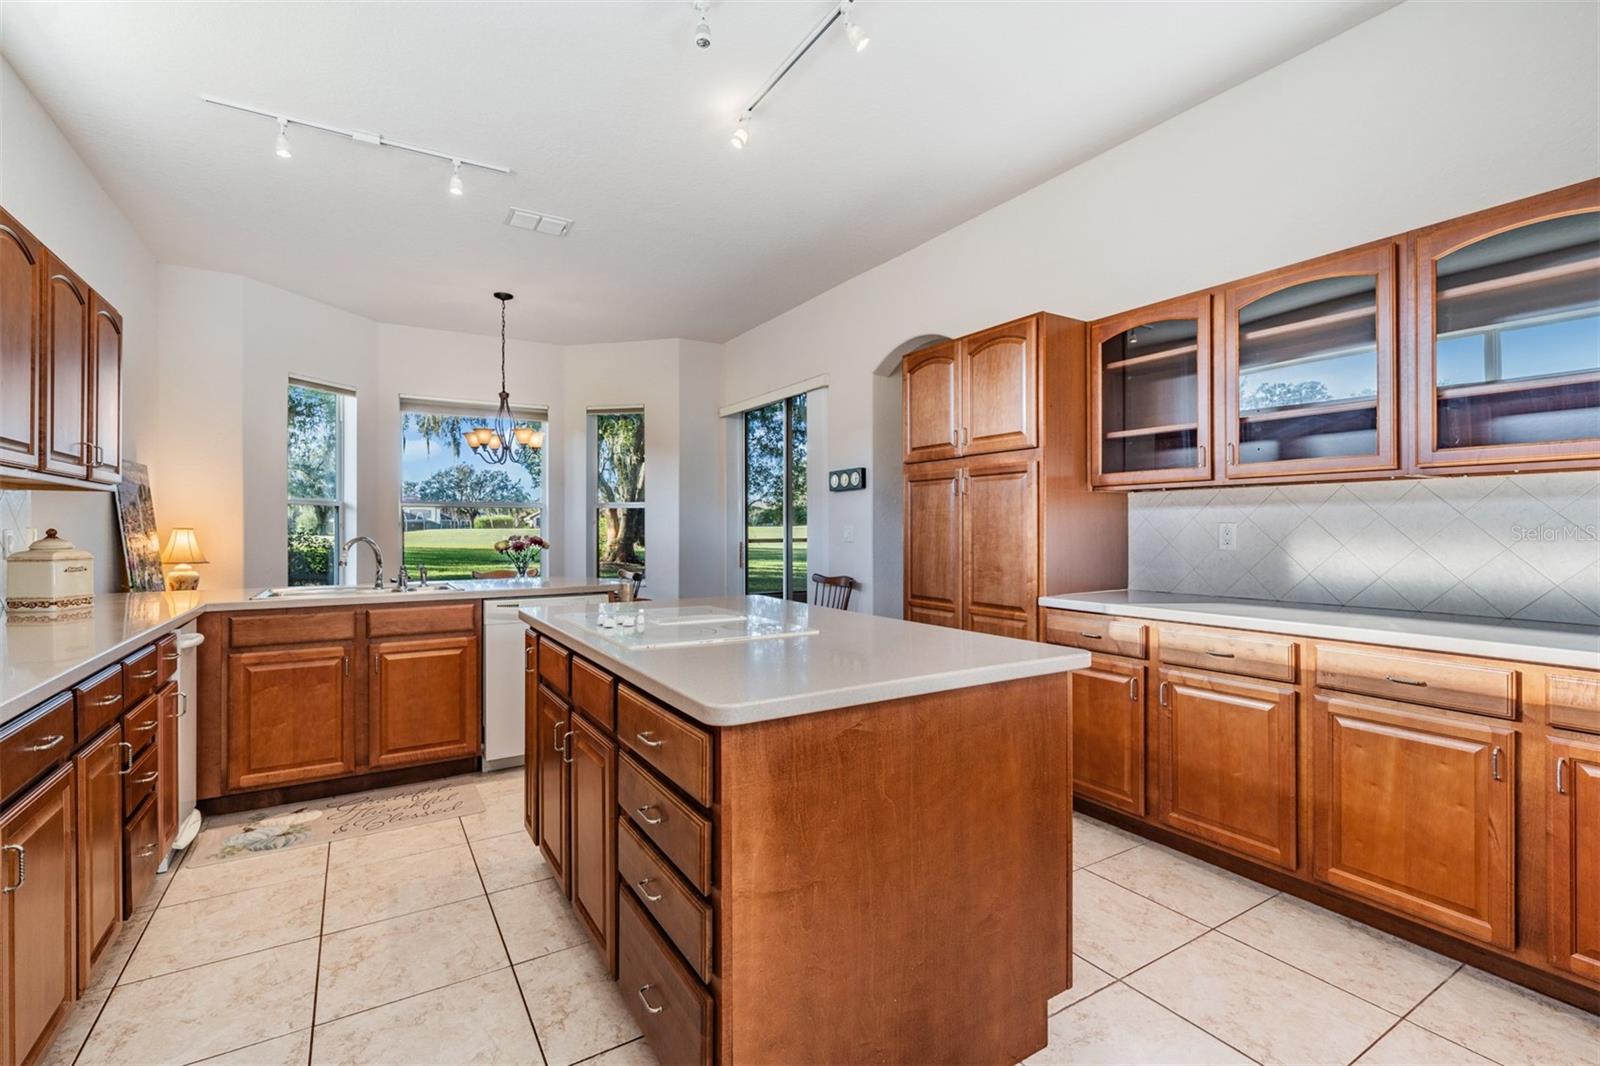 Center Island with warm Wooden cabinets, solid surface tops and spectacular views!